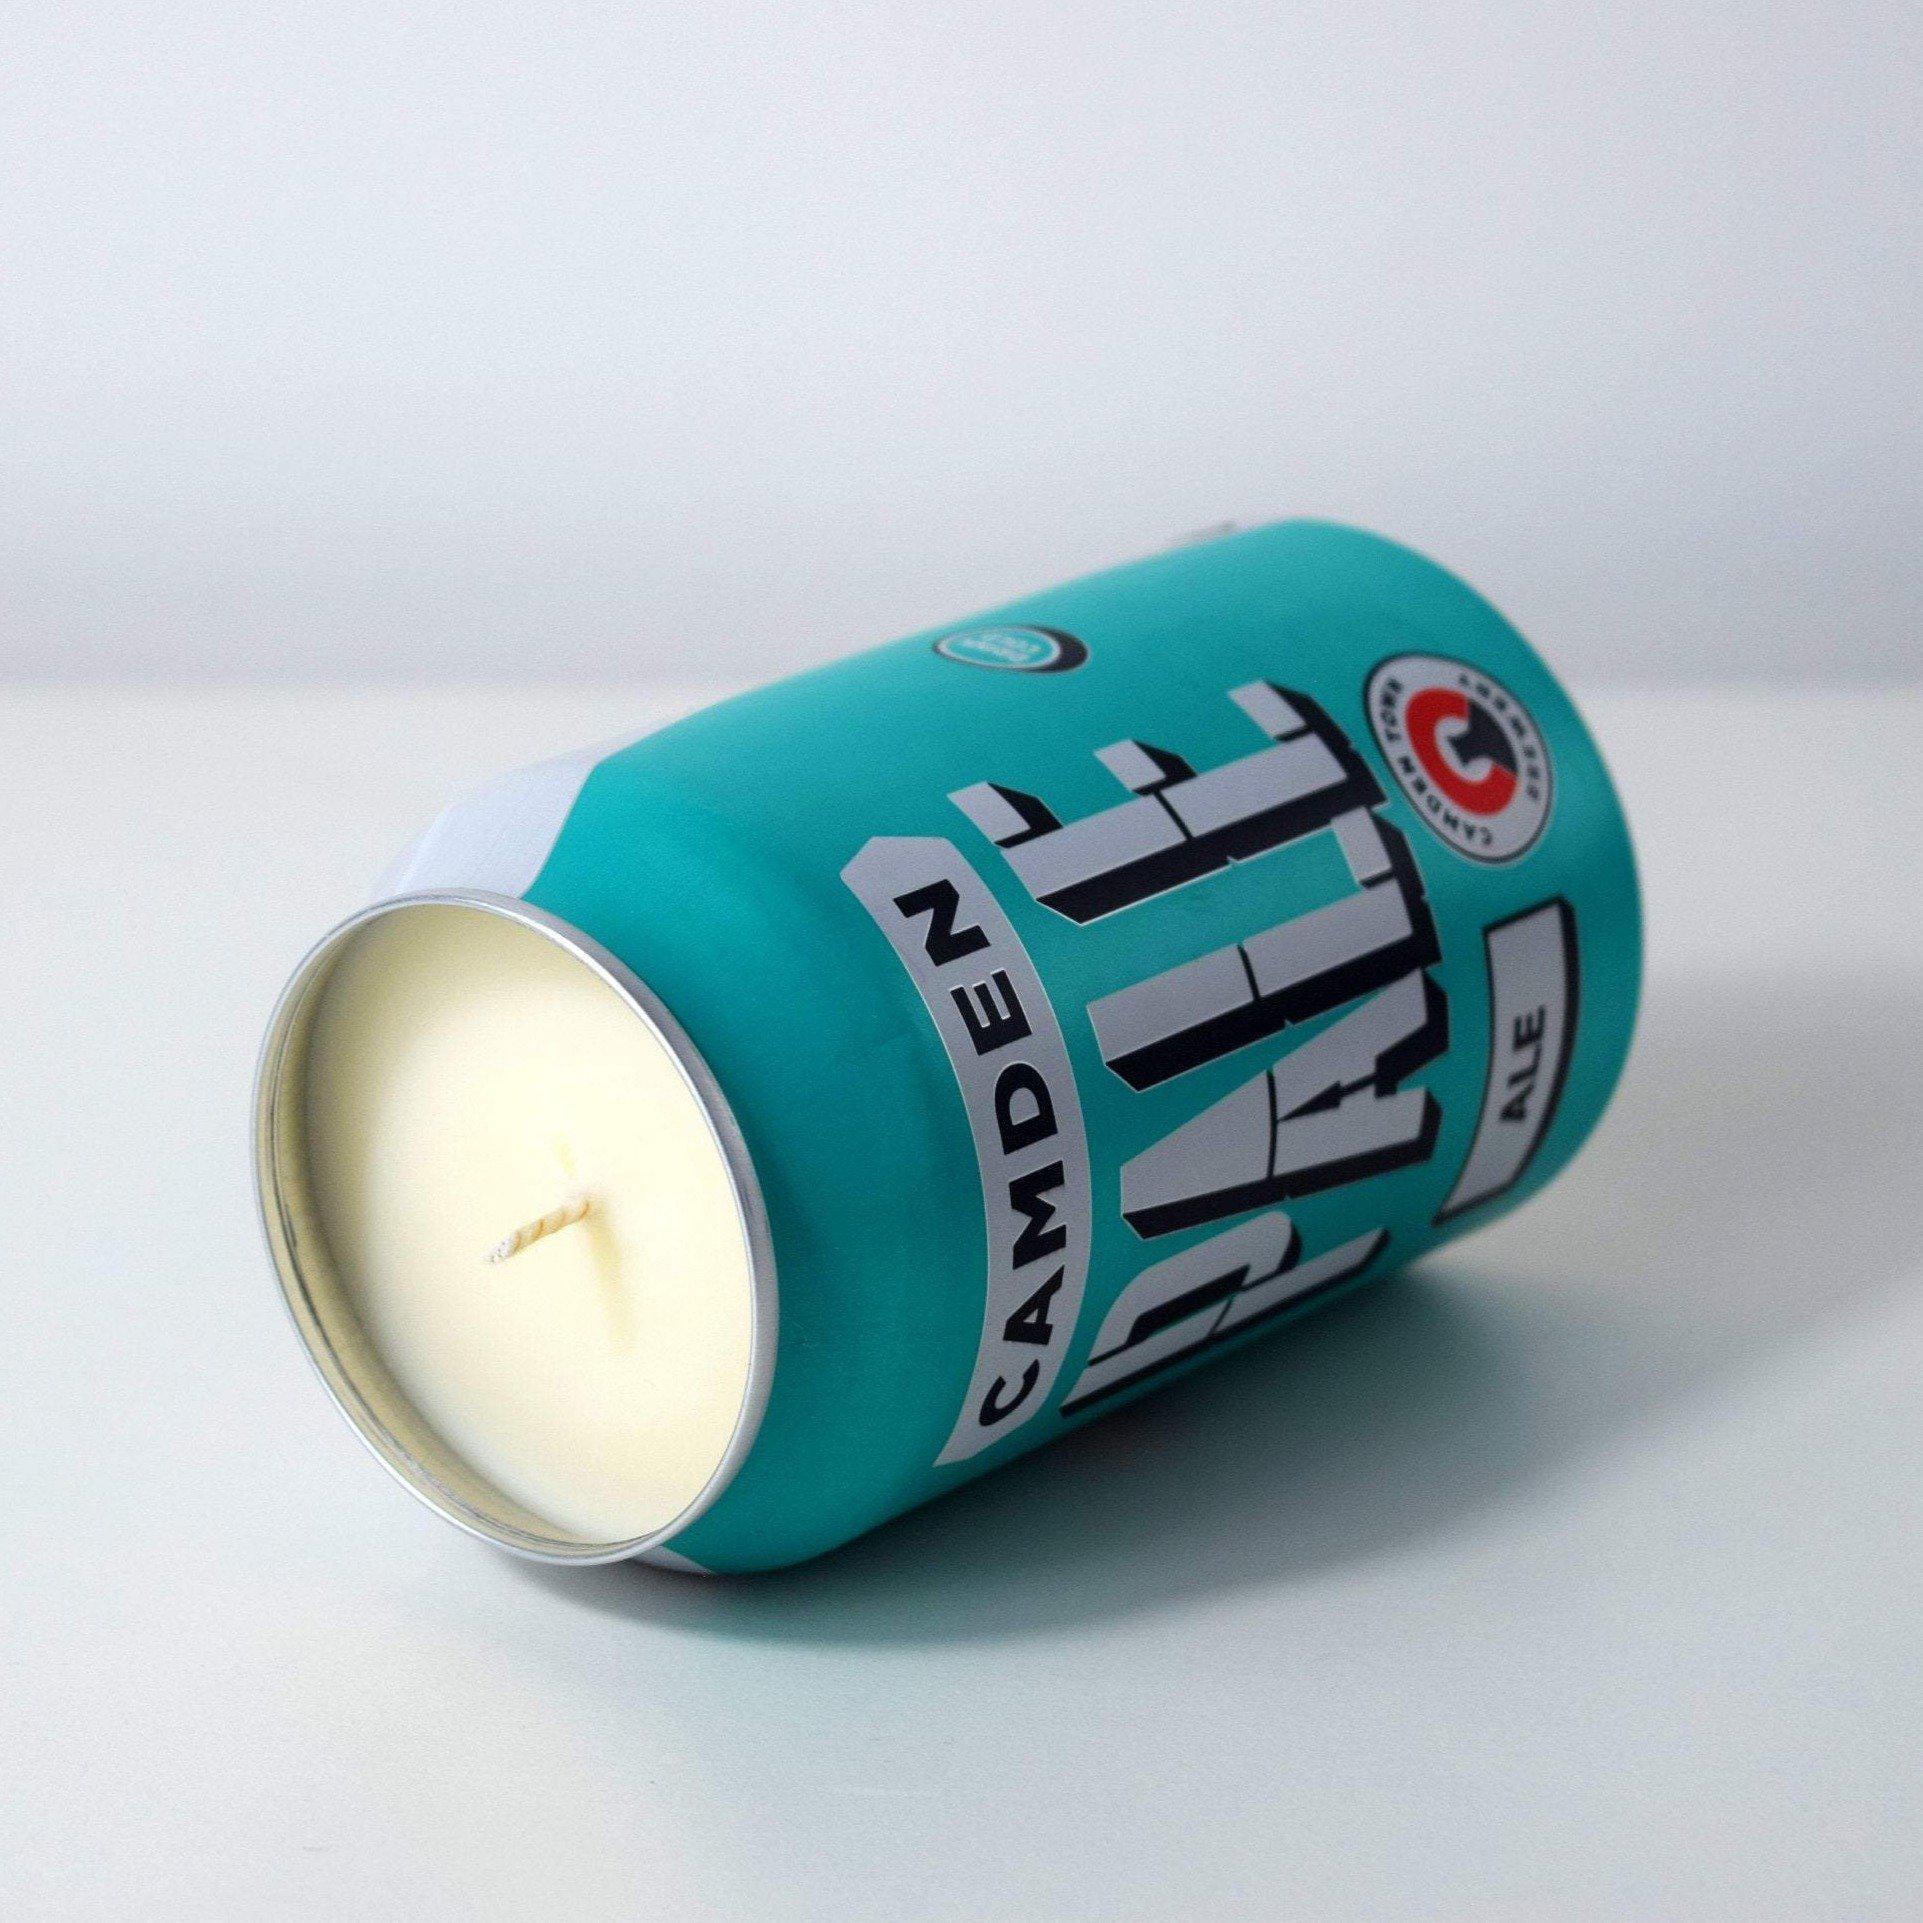 Camden Pale Ale Beer Can Candle Beer & Ale Can Candles Adhock Homeware